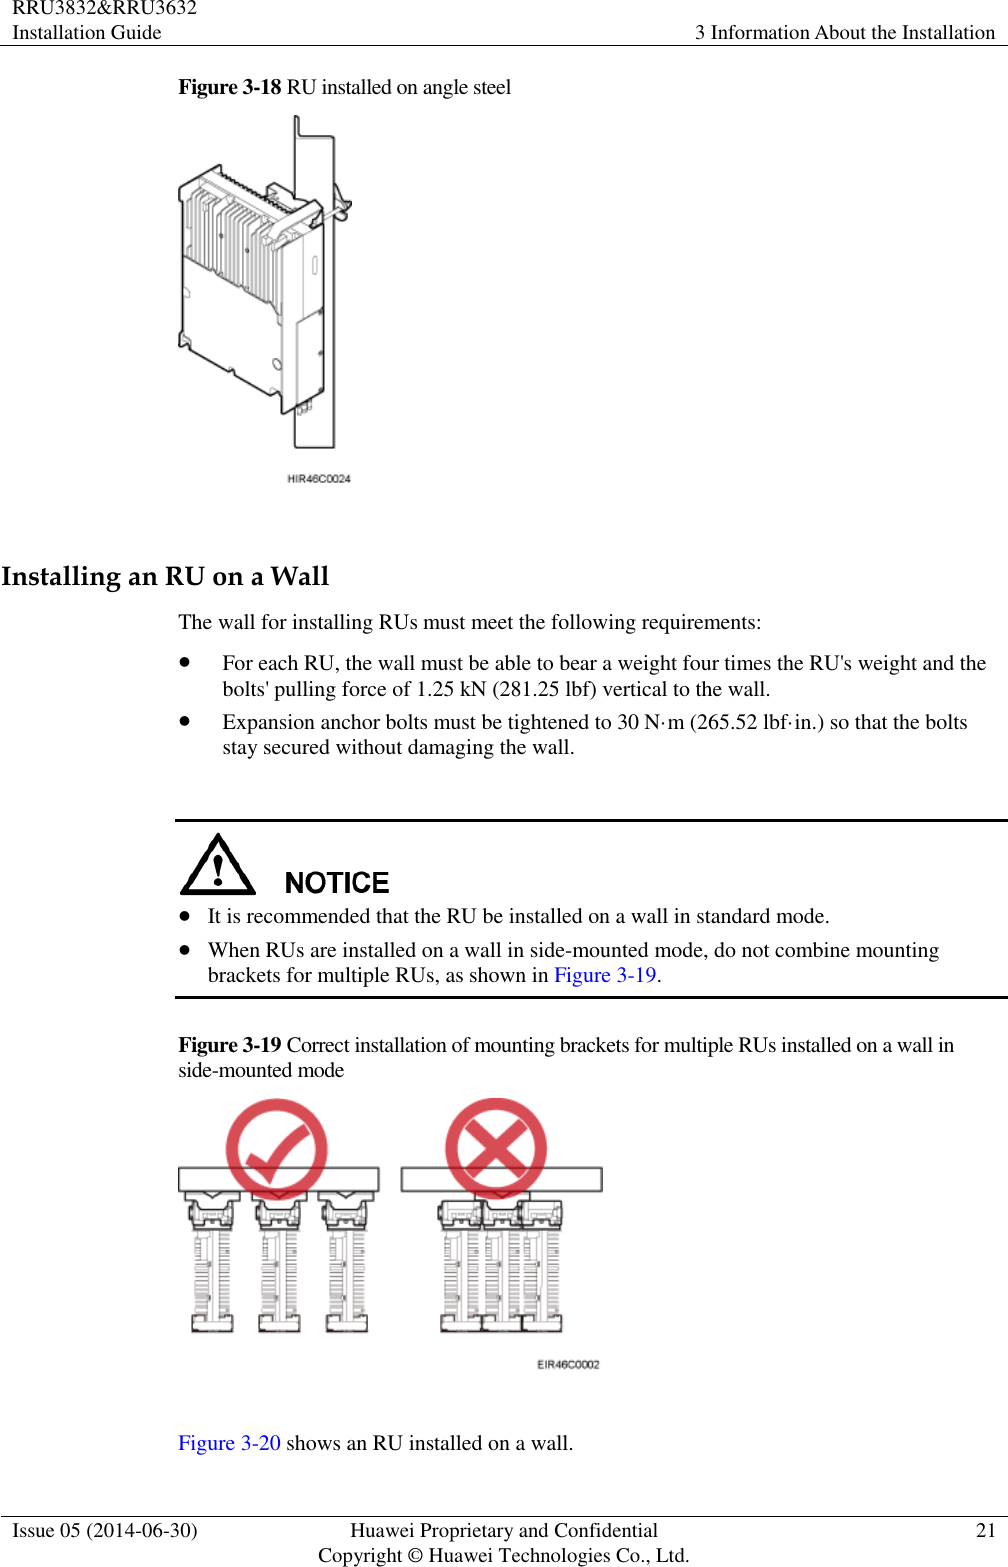 RRU3832&amp;RRU3632 Installation Guide 3 Information About the Installation  Issue 05 (2014-06-30) Huawei Proprietary and Confidential                                     Copyright © Huawei Technologies Co., Ltd. 21  Figure 3-18 RU installed on angle steel   Installing an RU on a Wall The wall for installing RUs must meet the following requirements:  For each RU, the wall must be able to bear a weight four times the RU&apos;s weight and the bolts&apos; pulling force of 1.25 kN (281.25 lbf) vertical to the wall.  Expansion anchor bolts must be tightened to 30 N·m (265.52 lbf·in.) so that the bolts stay secured without damaging the wall.    It is recommended that the RU be installed on a wall in standard mode.  When RUs are installed on a wall in side-mounted mode, do not combine mounting brackets for multiple RUs, as shown in Figure 3-19. Figure 3-19 Correct installation of mounting brackets for multiple RUs installed on a wall in side-mounted mode   Figure 3-20 shows an RU installed on a wall. 